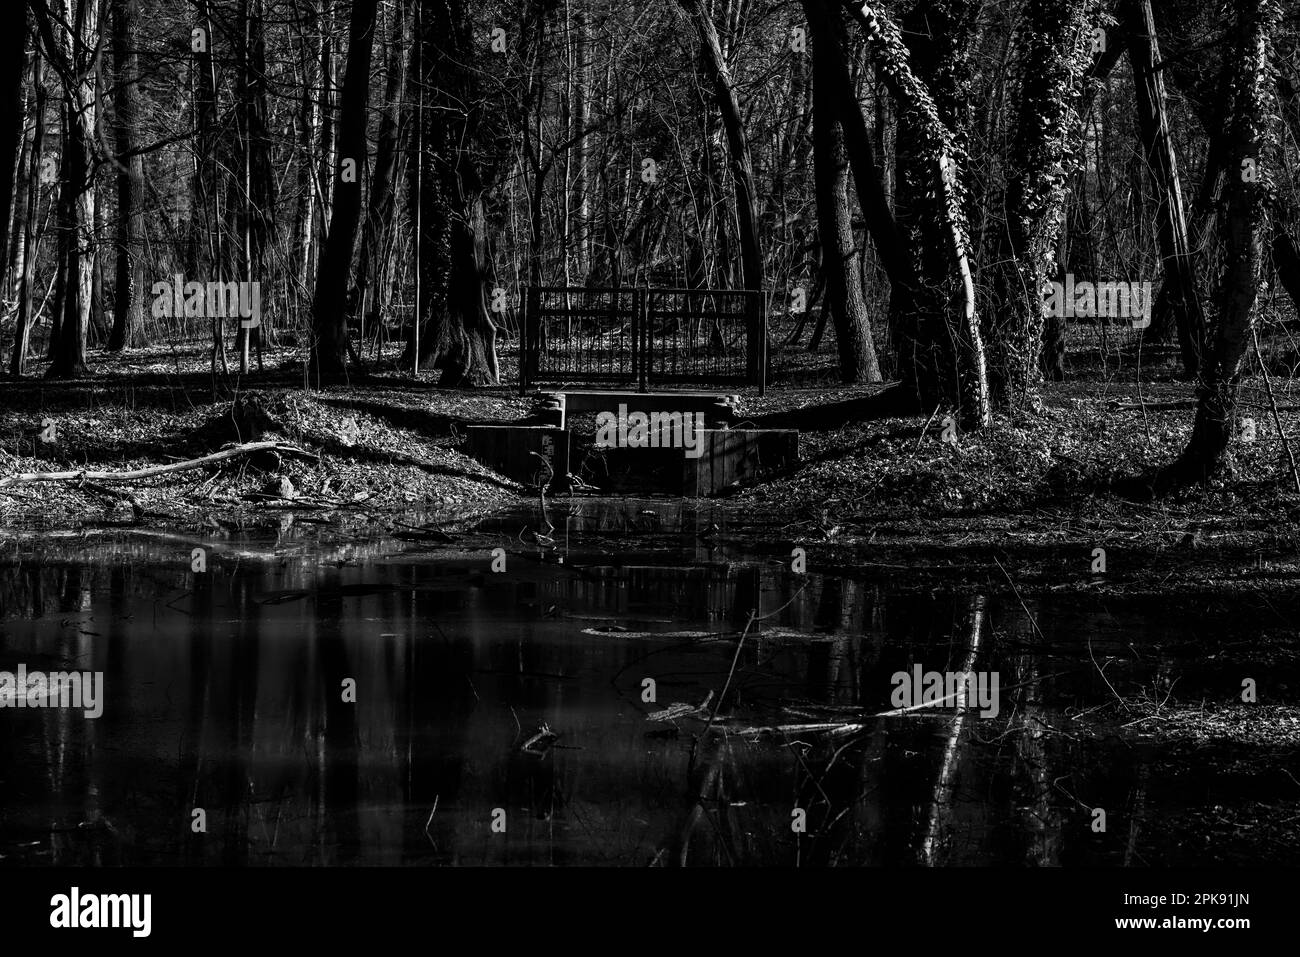 Small river in a forest, small iron bridge for hikers, black and white photography Stock Photo